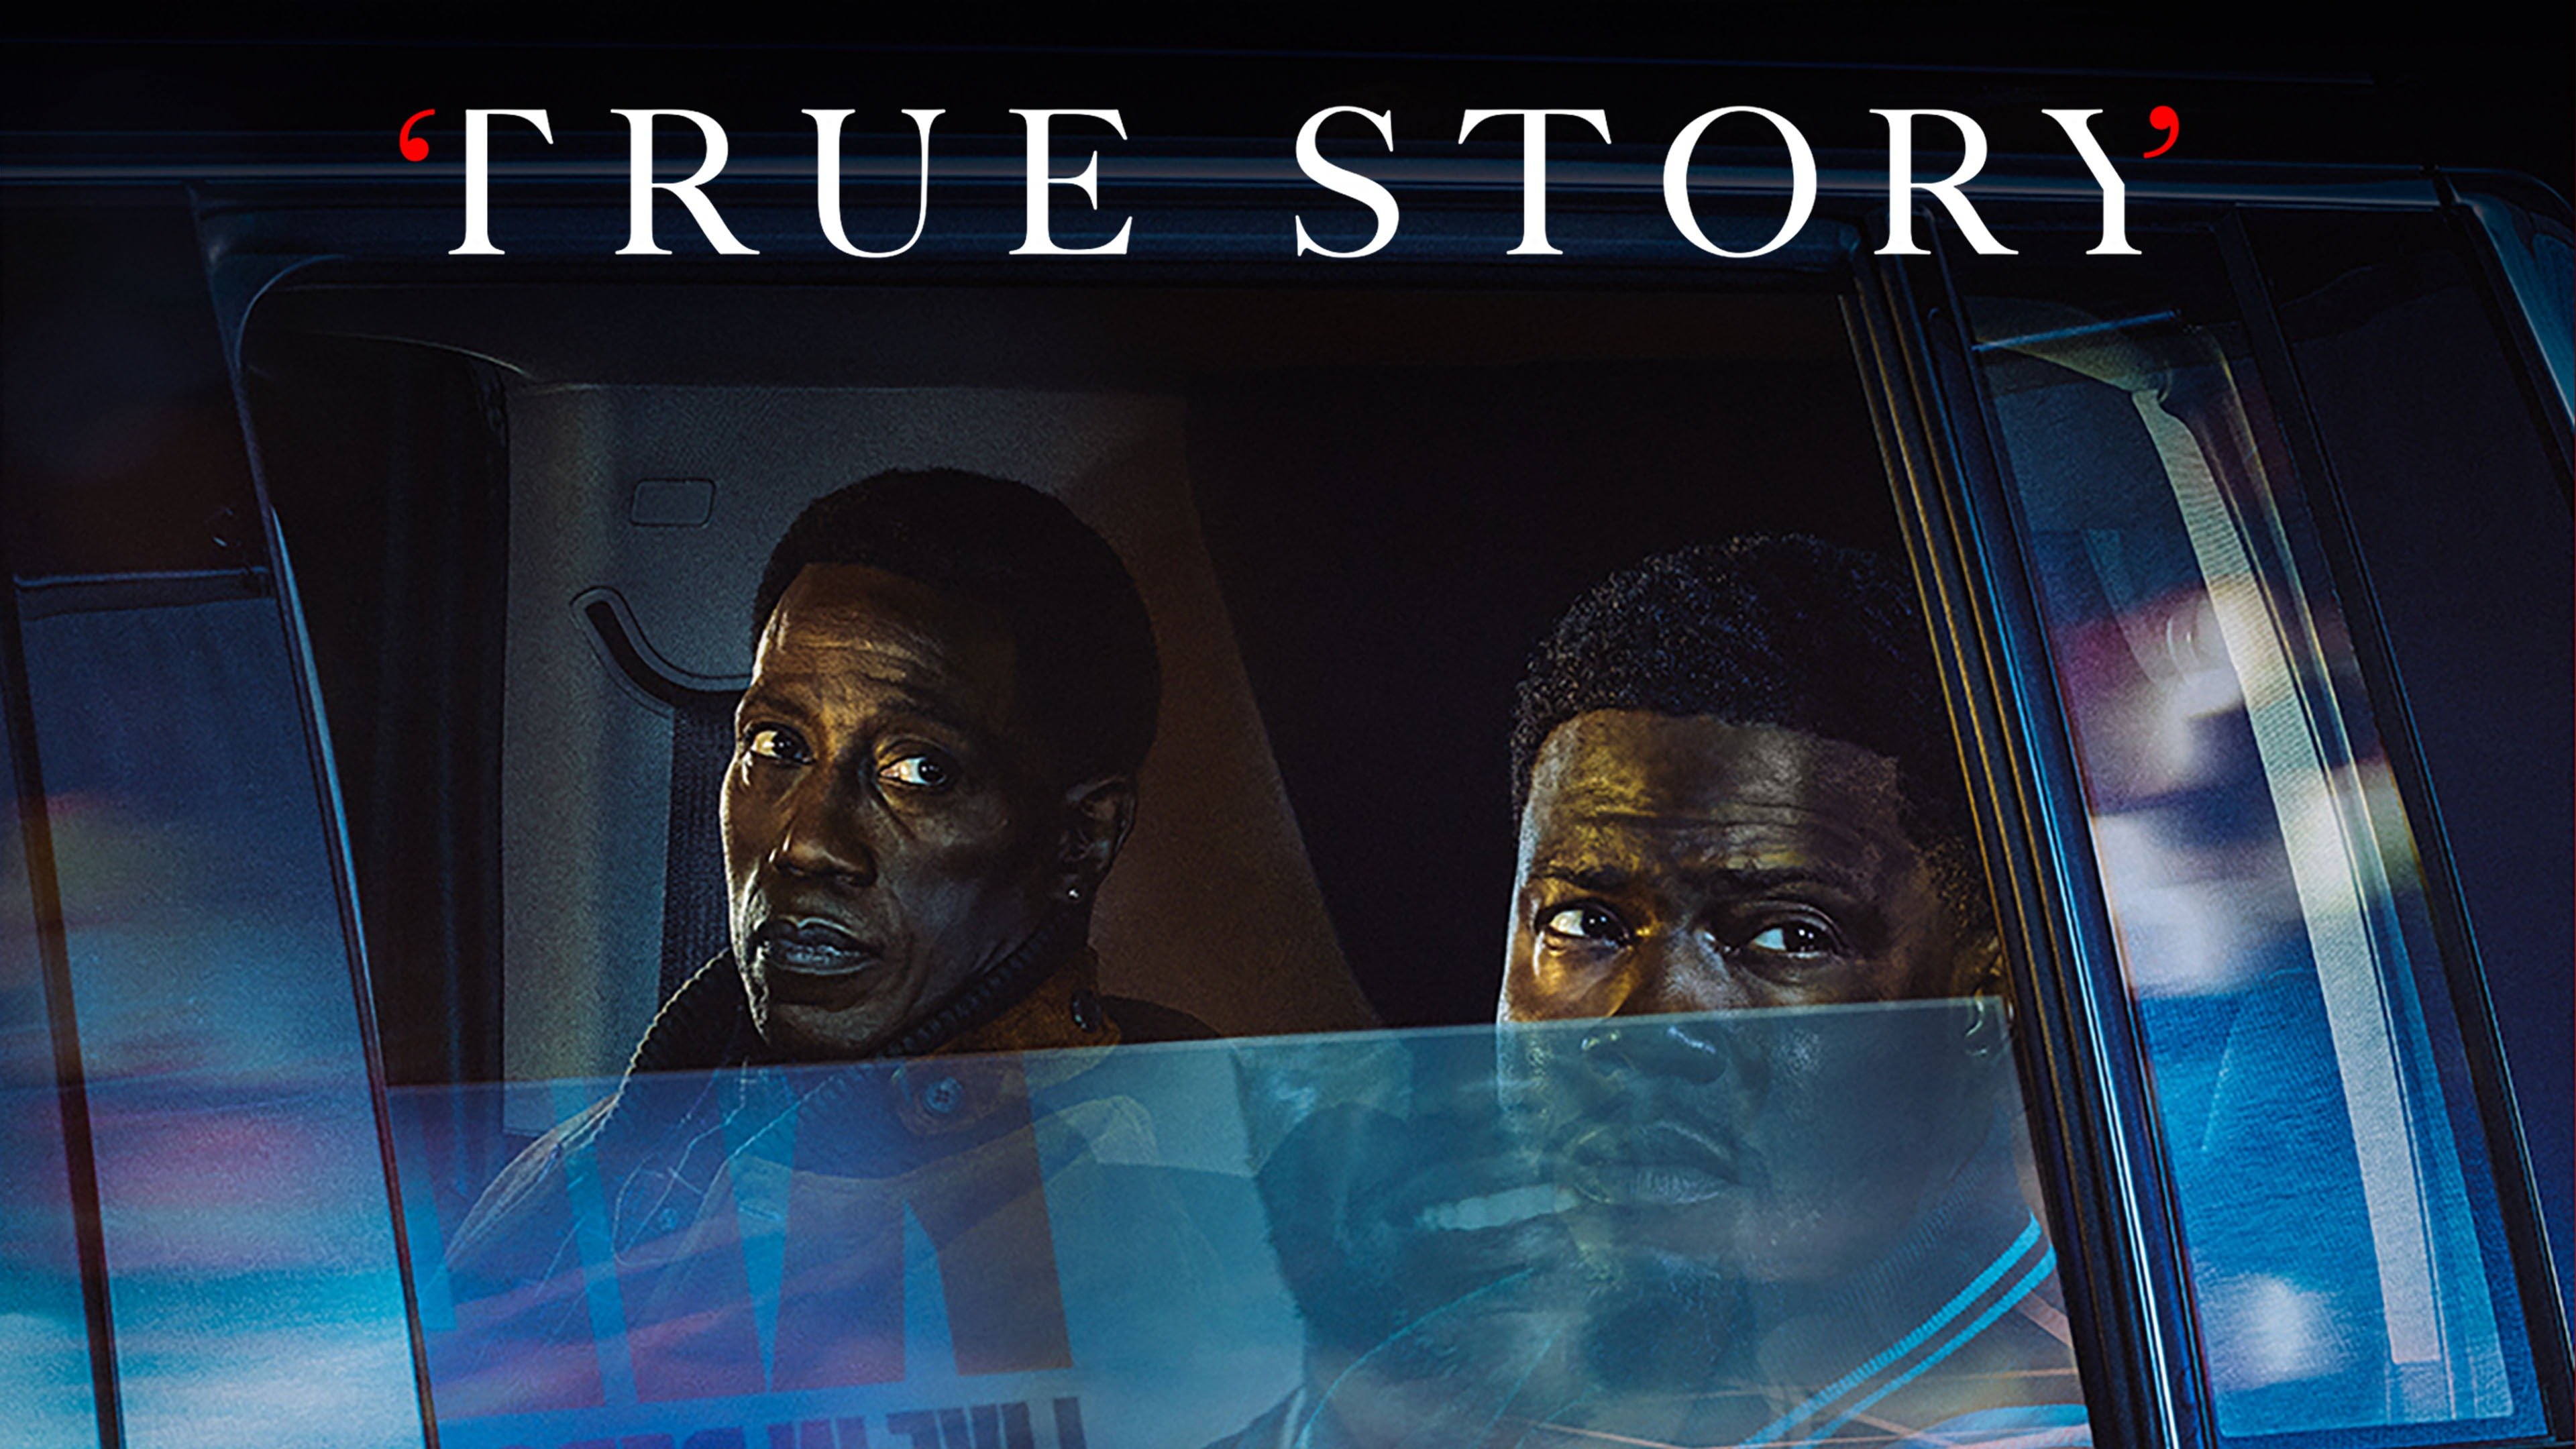 What Is True Story About On Netflix